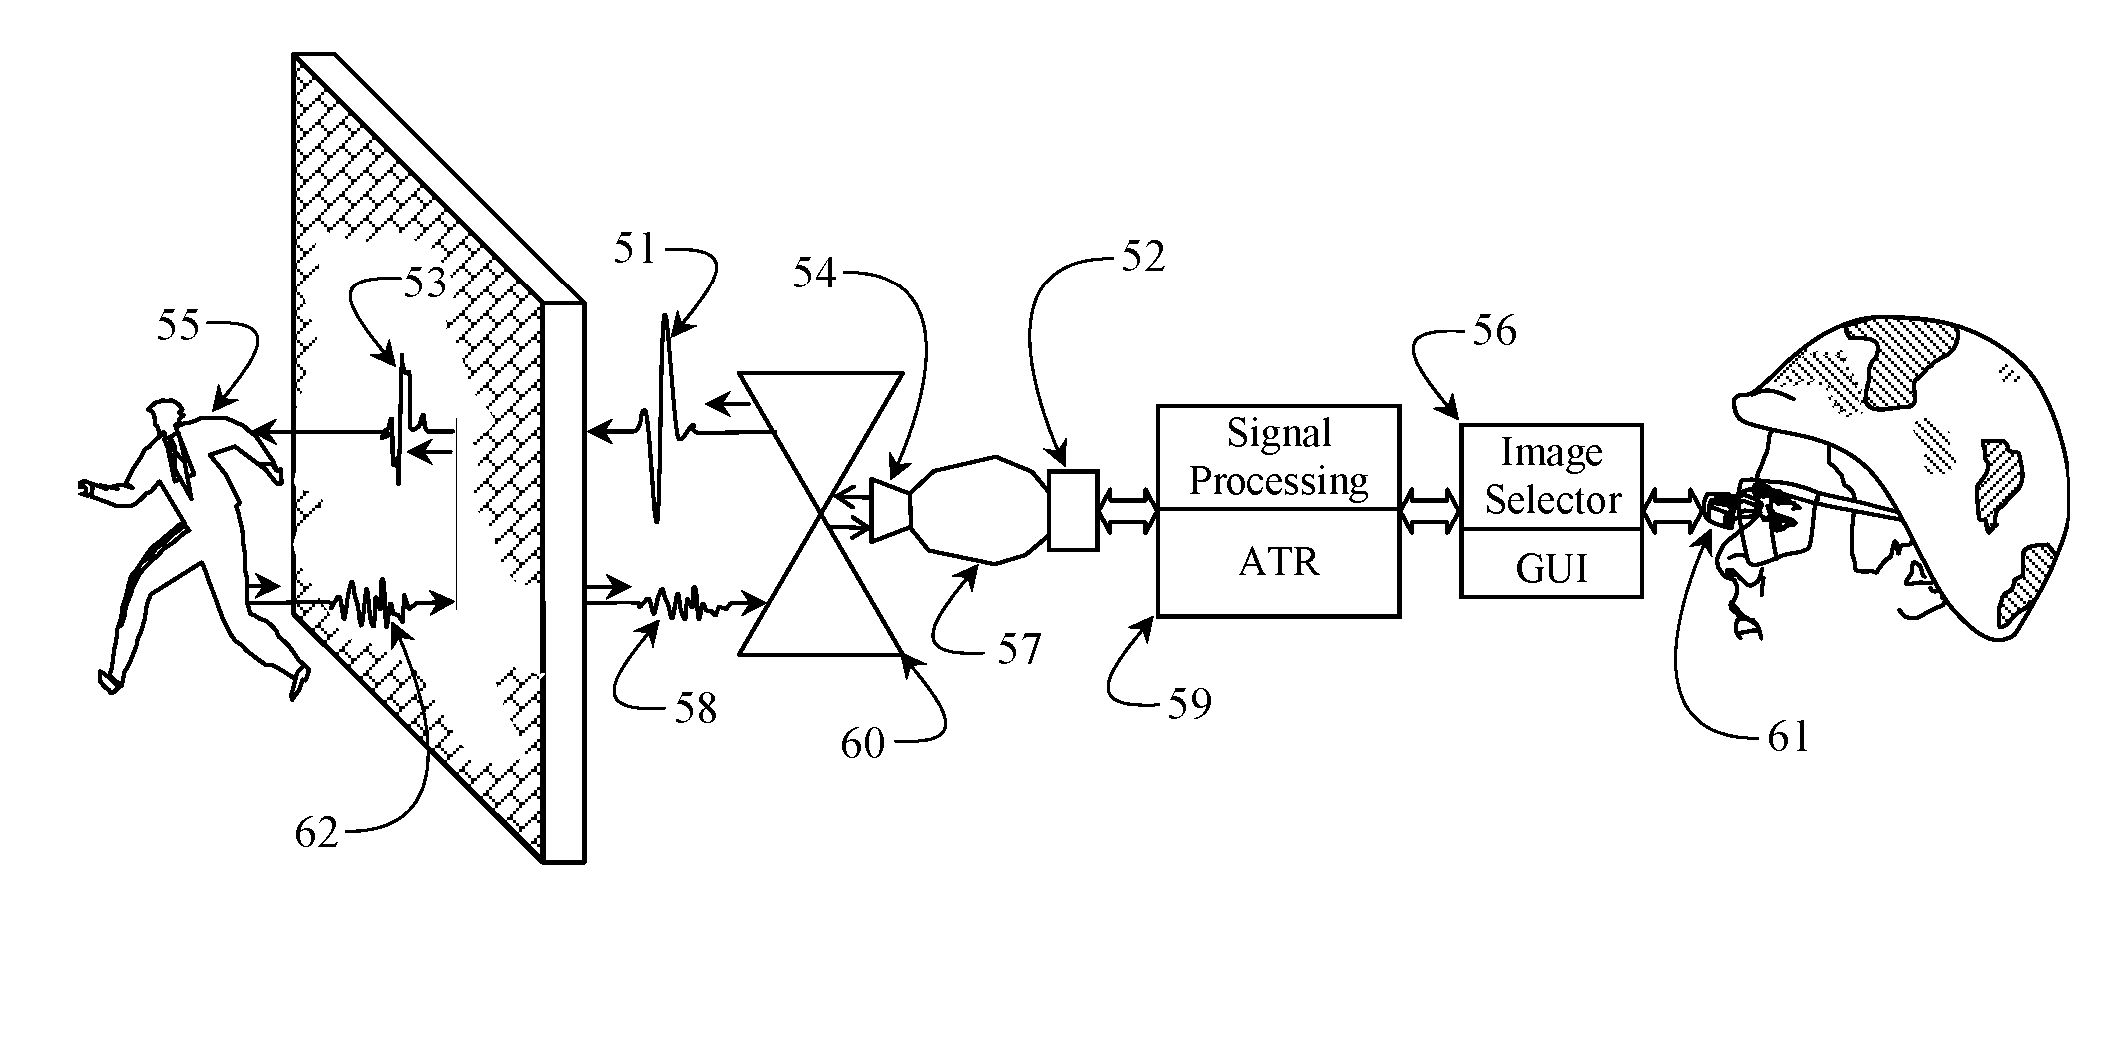 Apparatus and method to identify targets through opaque barriers